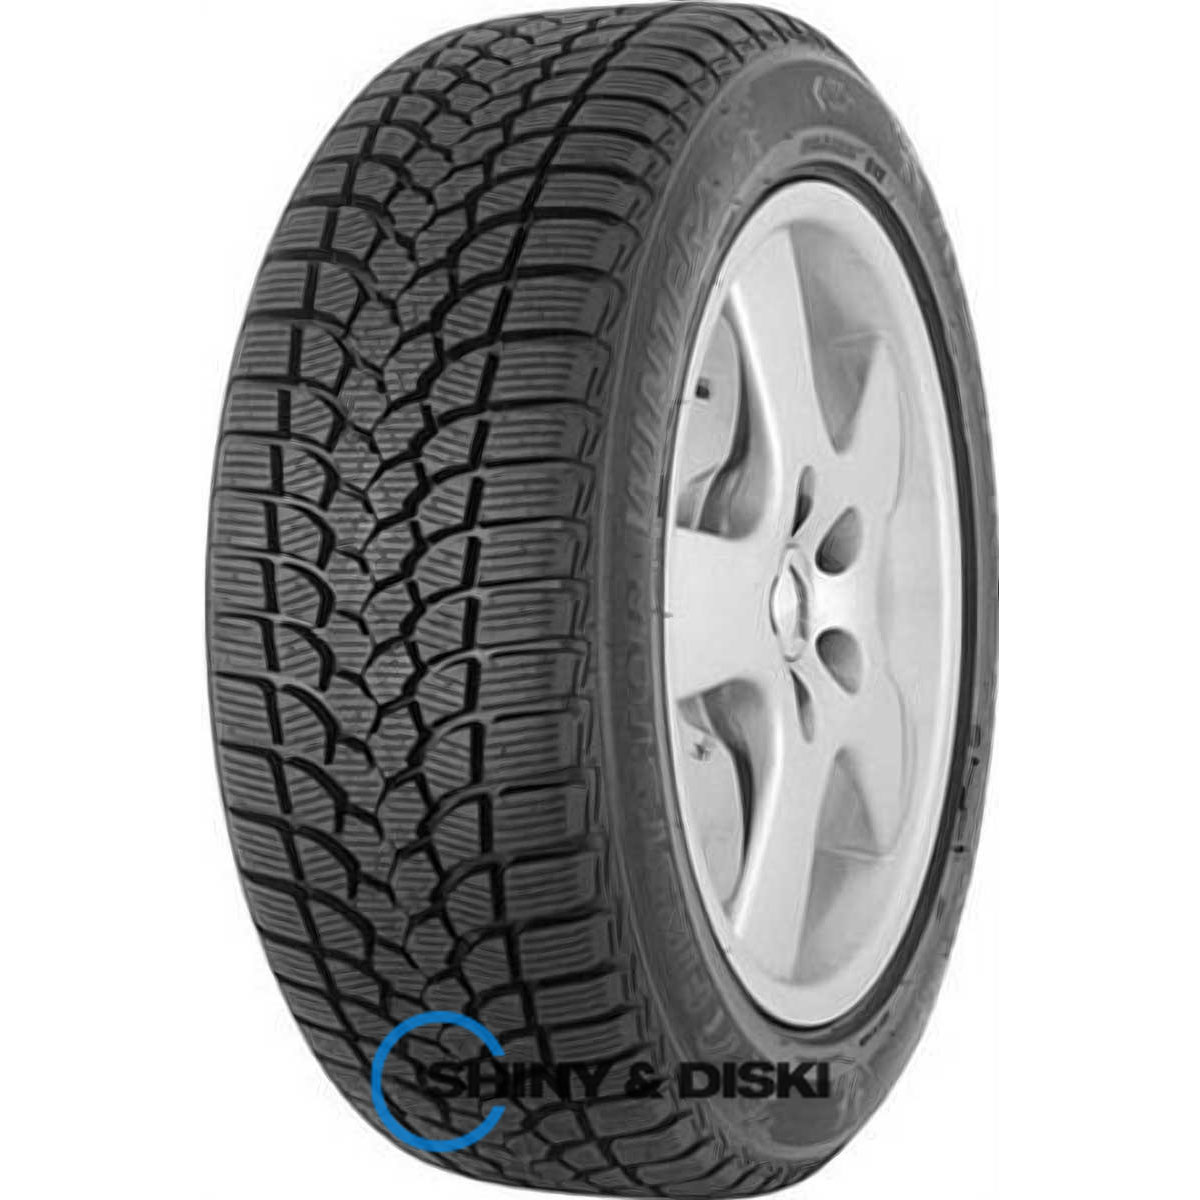 firststop winter 2 185/60 r14 82t